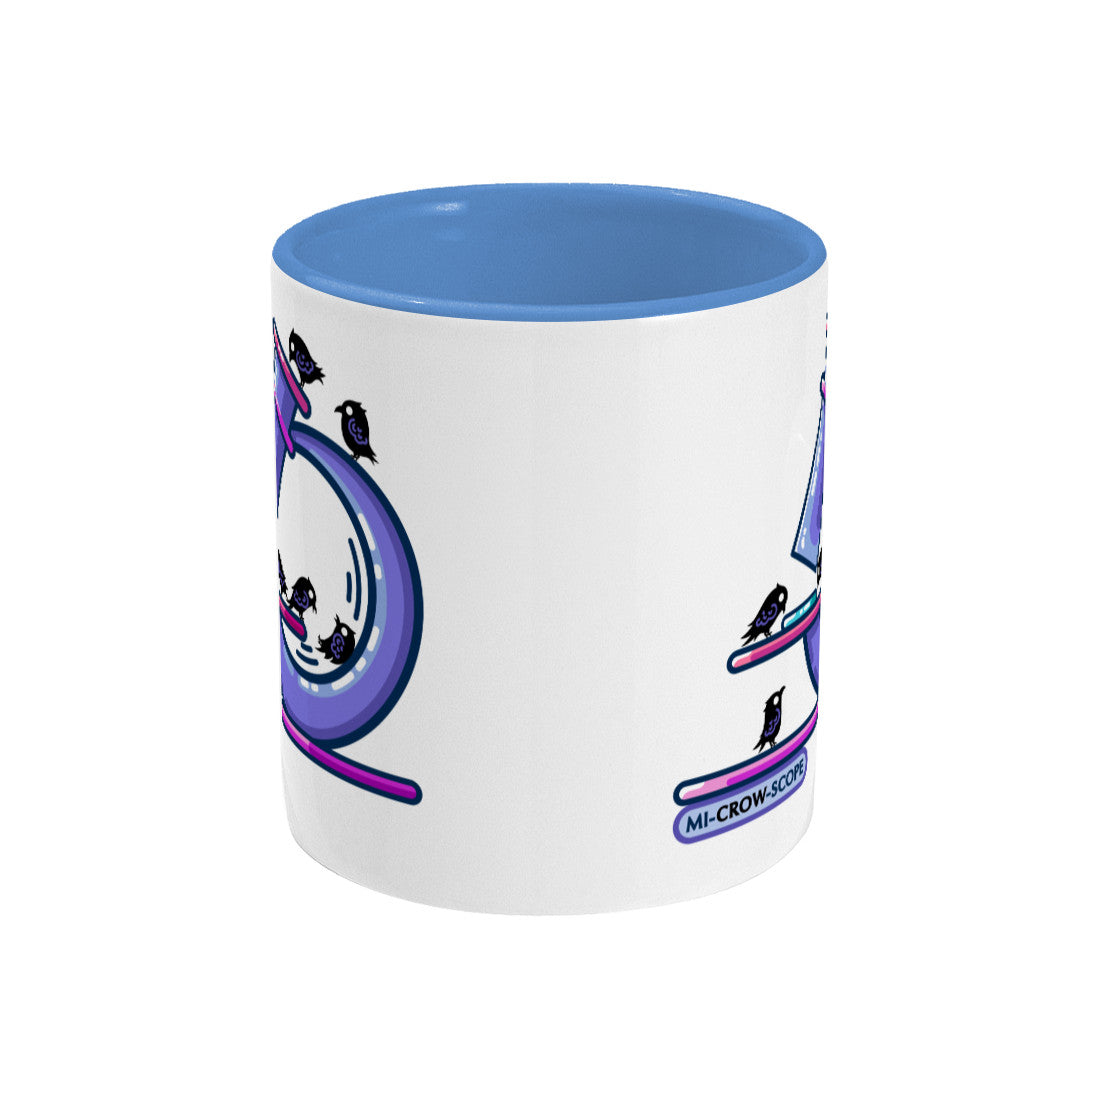 A two-toned white and blue ceramic mug, side on, with the edges of the front and back designs showing.